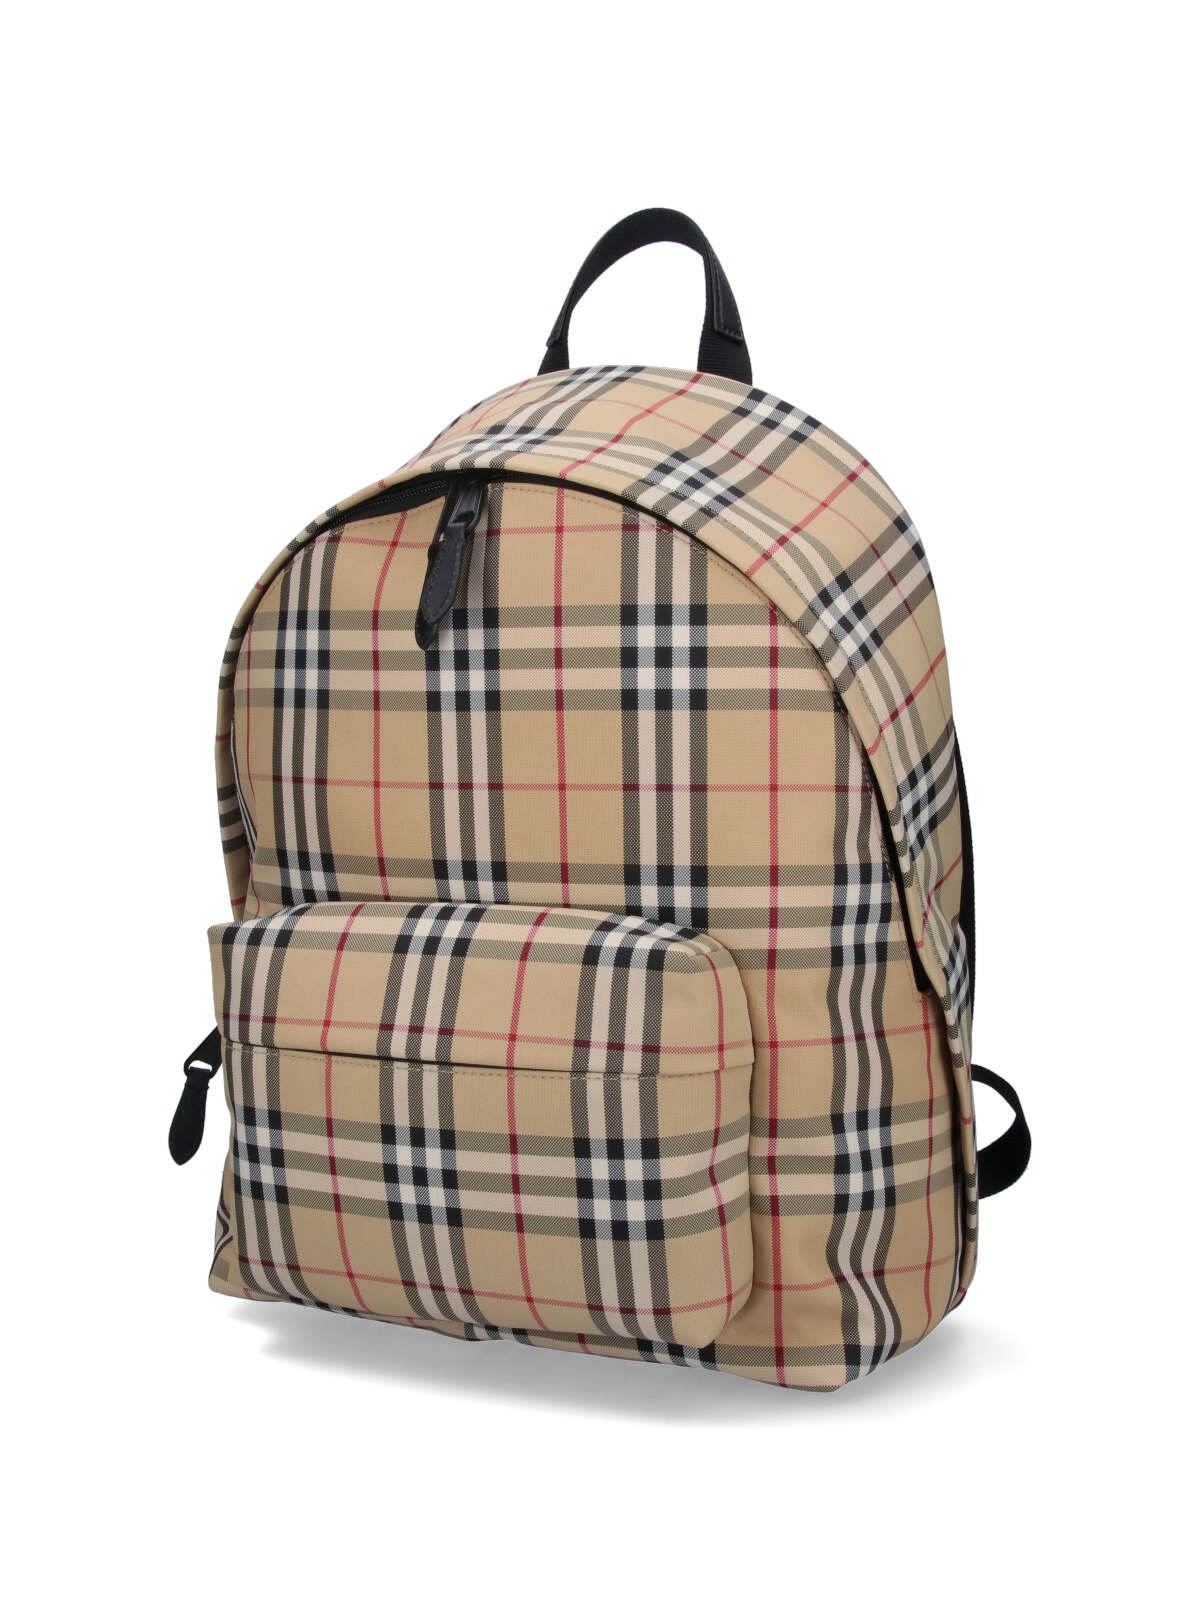 'CHECK' BACKPACK - 2